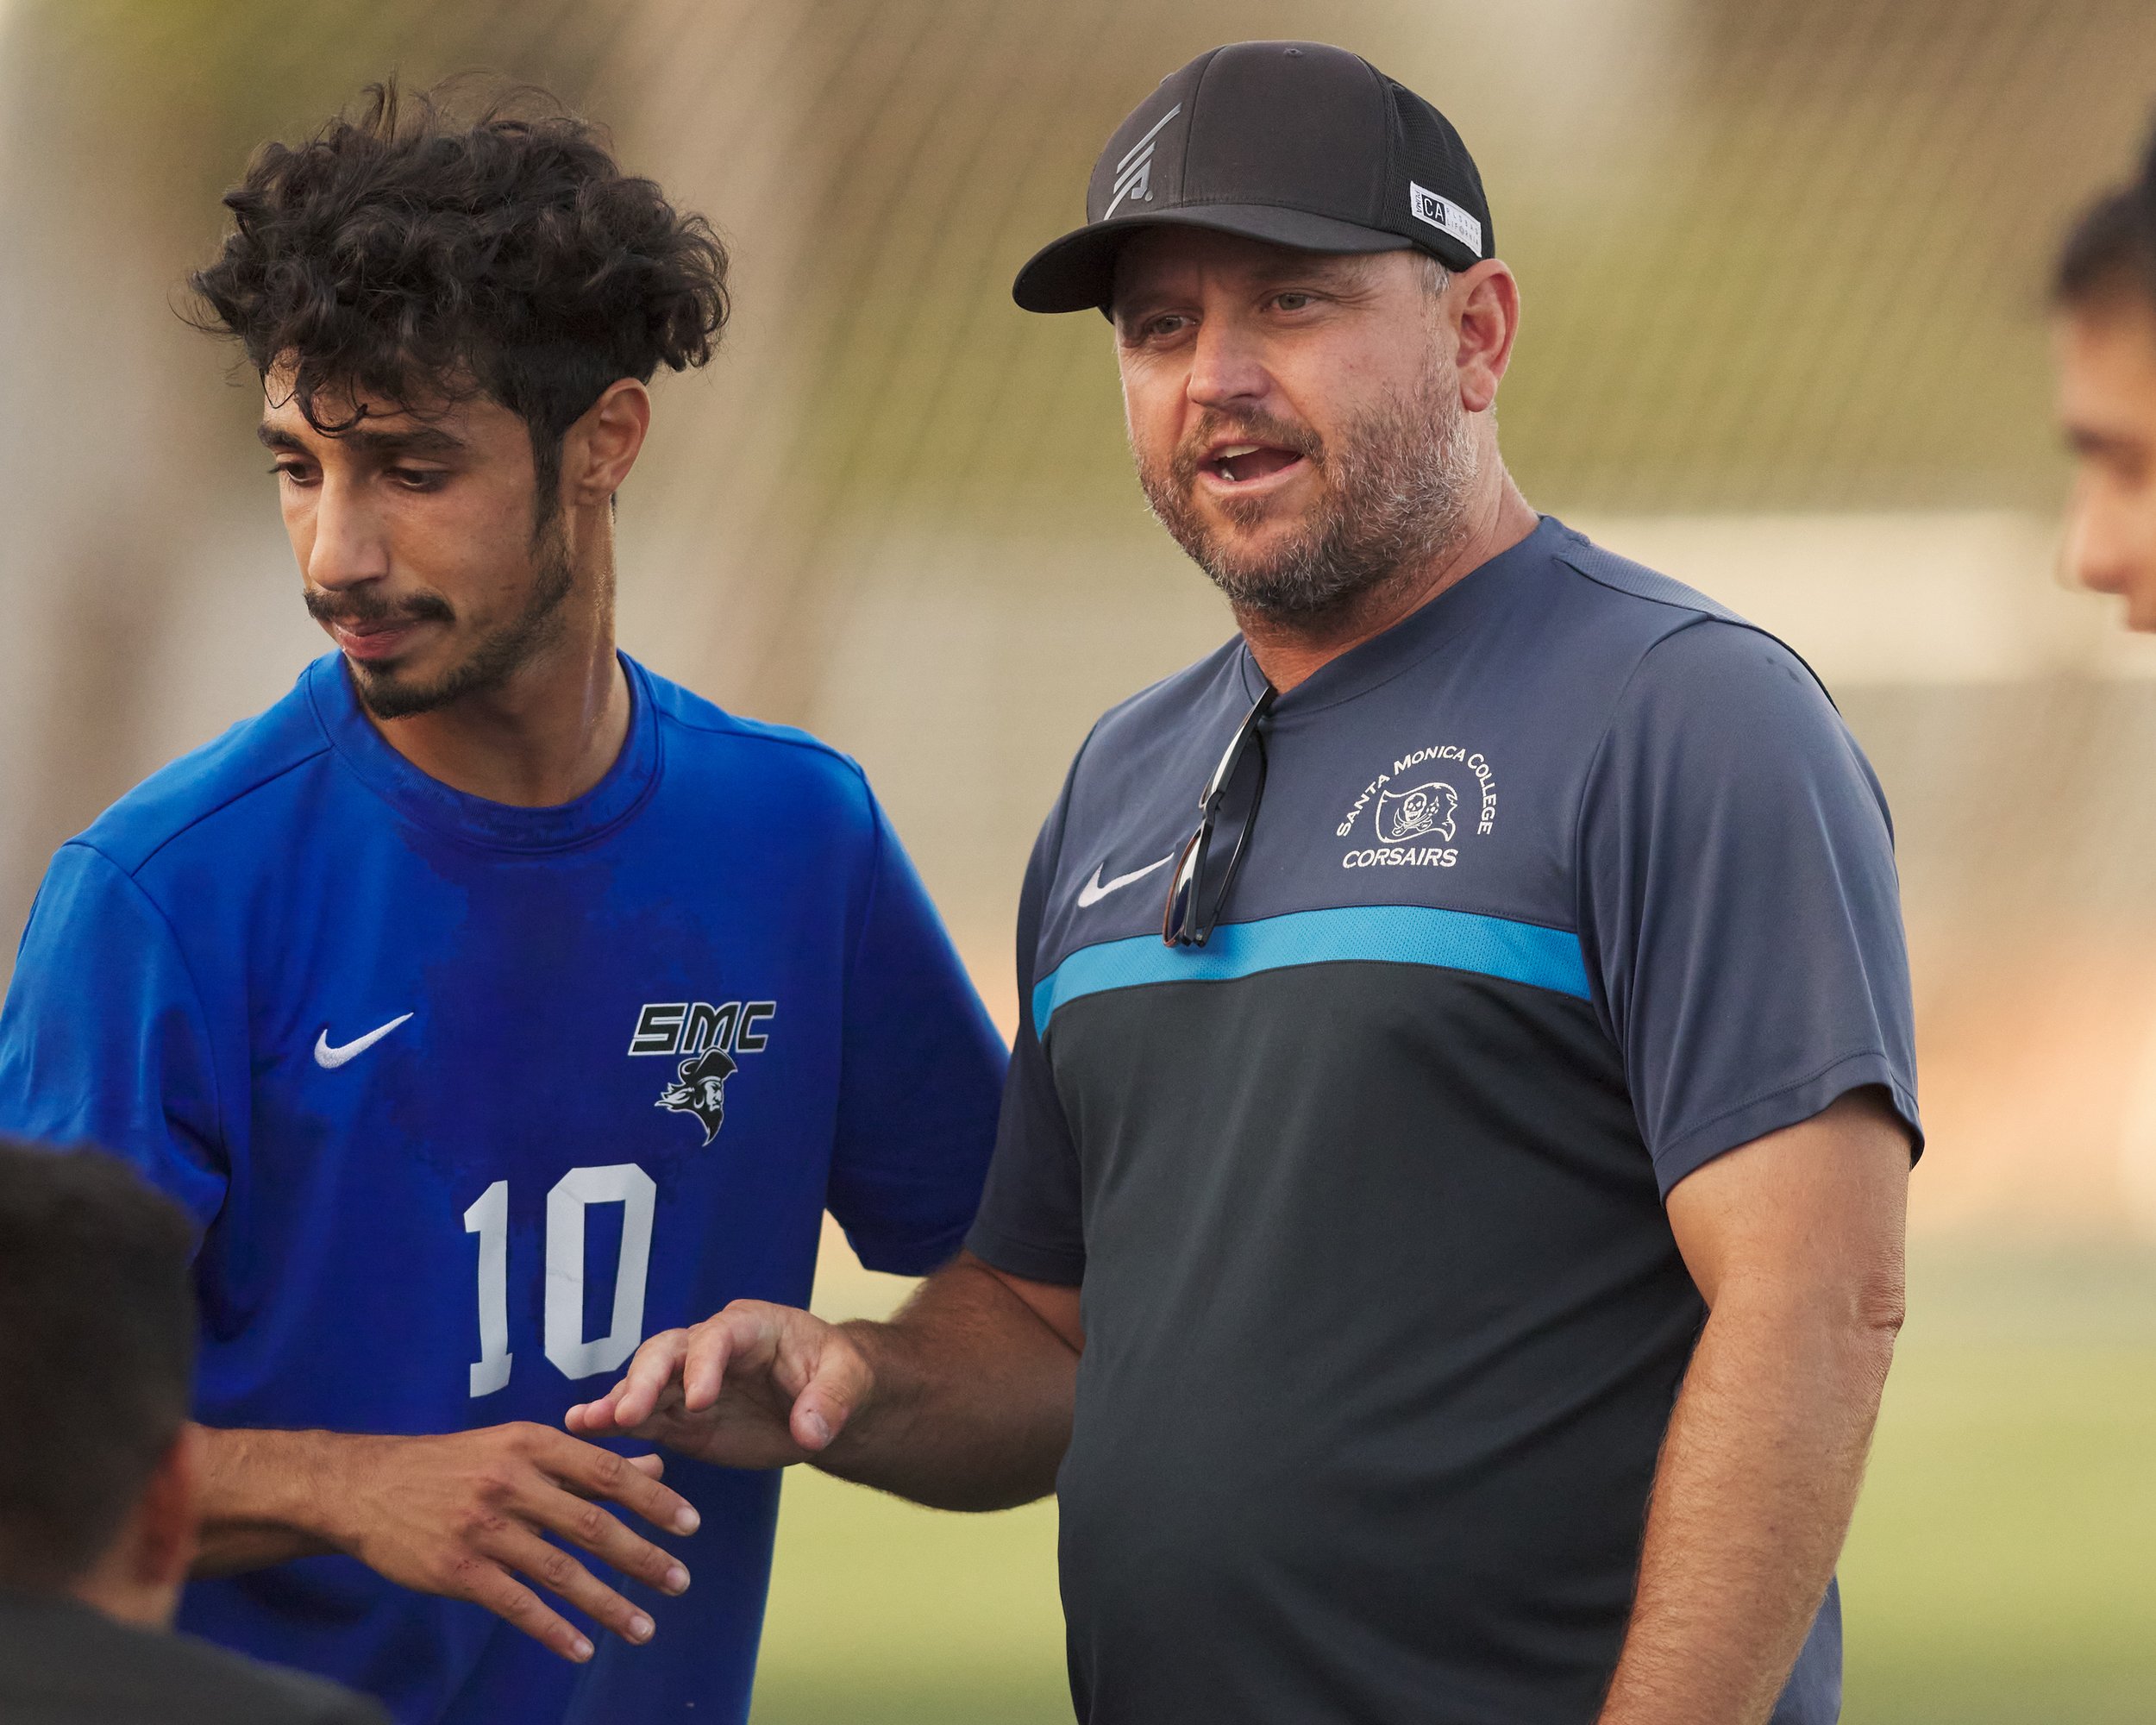  Santa Monica College Corsairs Men's Soccer Head Coach Tim Pierce (right) and midfielder Roey Kivity (left) during the men's soccer match against the Moorpark College Raiders on Thursday, Nov. 9, 2023, at Corsair Field in Santa Monica, Calif. The Cor